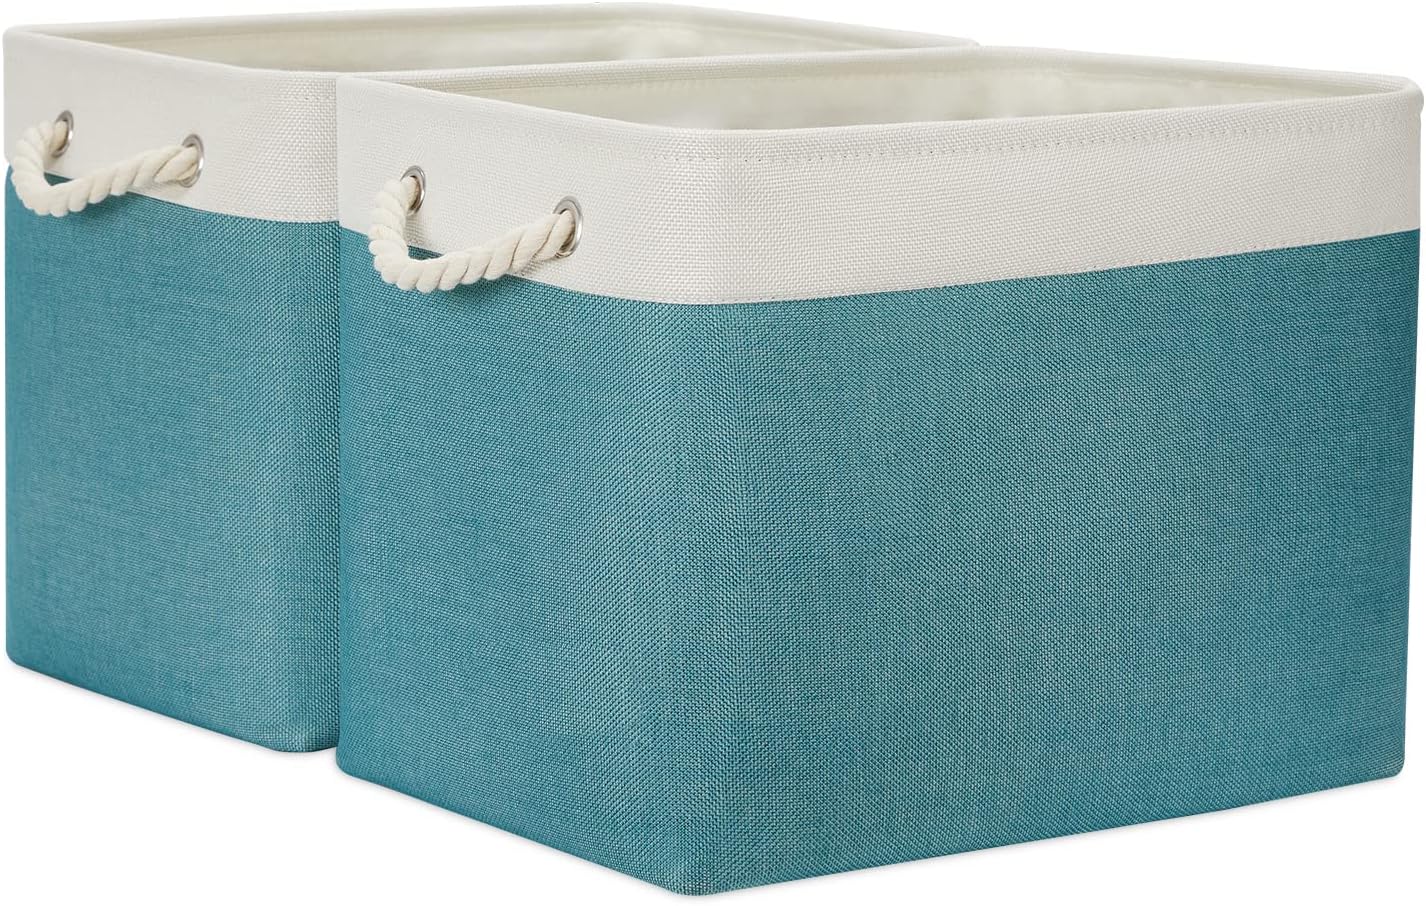 Temary Fabric Baskets Storage Baskets for Organizing 2 Pcs Decorative Baskets for Gifts Empty Collapsible Storage Bins for Home Office Closet(White&Teal,16Lx12Wx12H Inches)